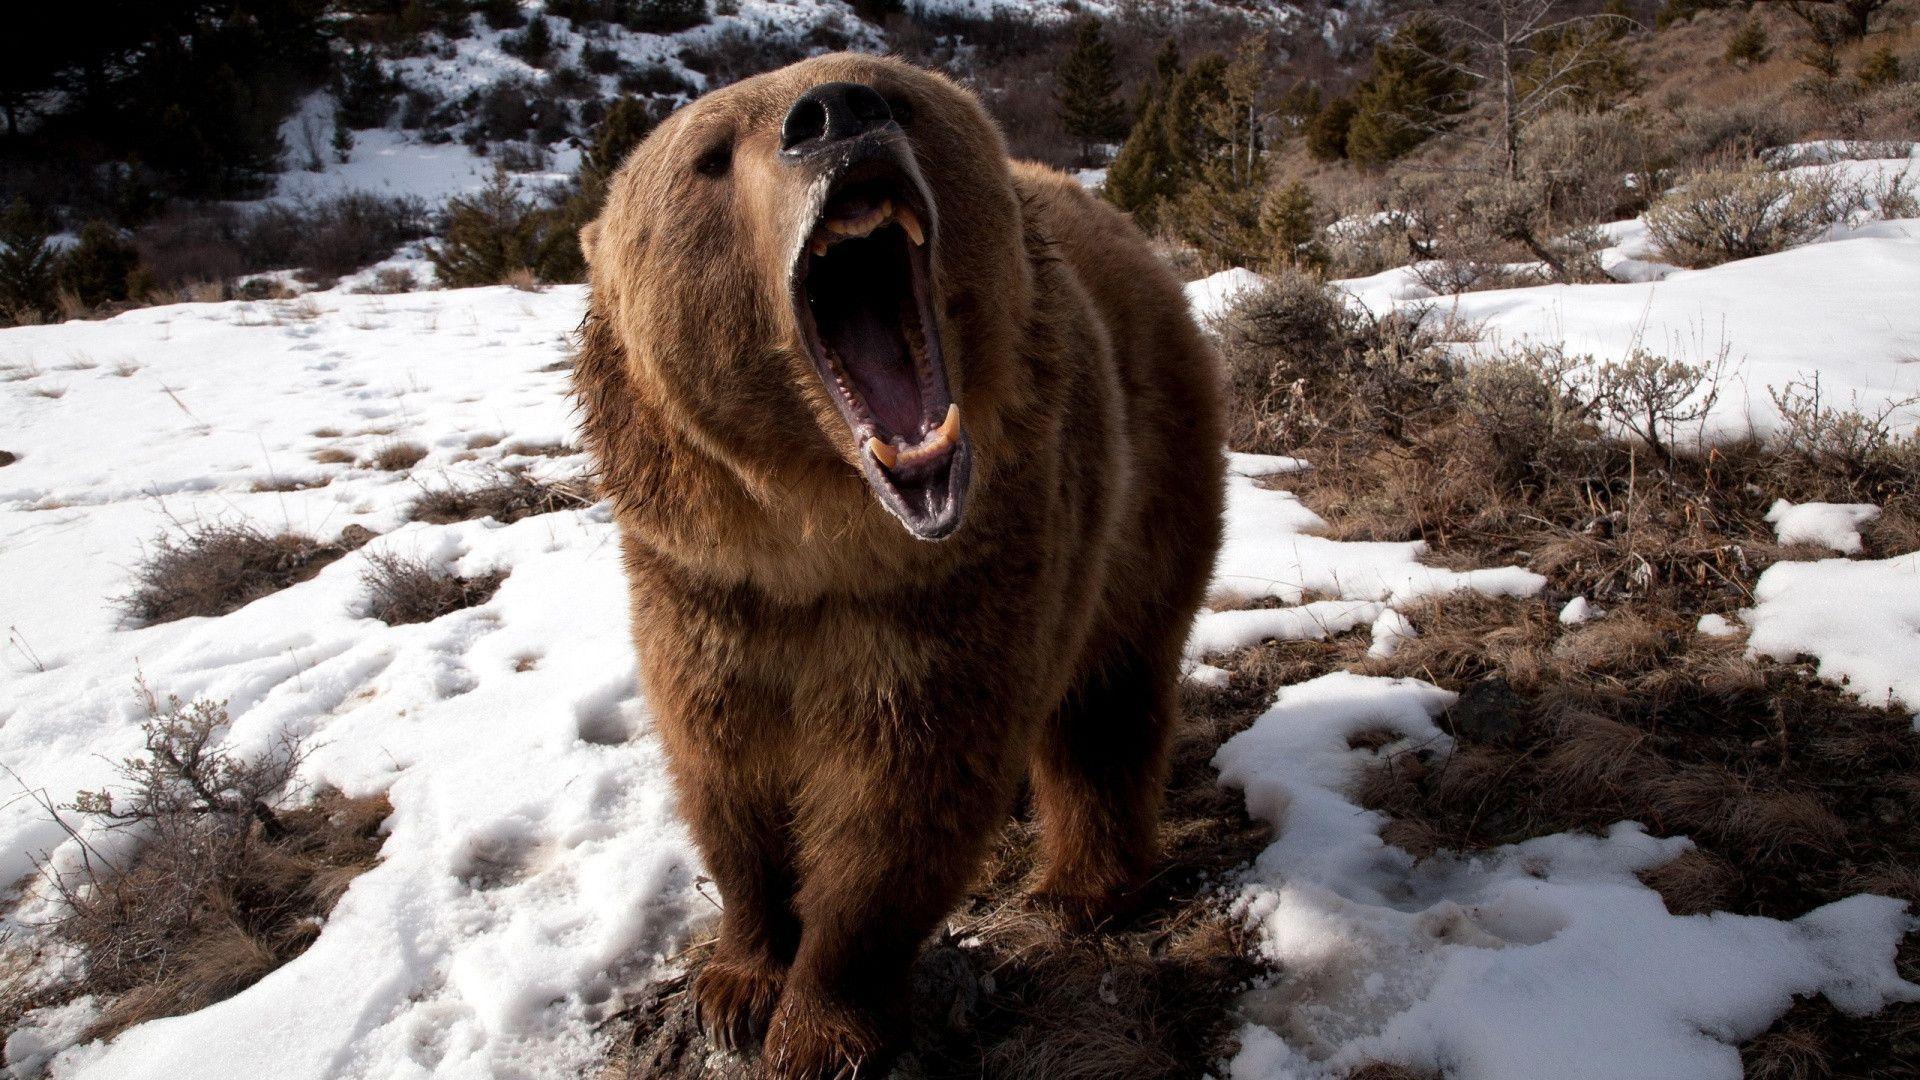 Wallpaper For > Angry Grizzly Bear Wallpaper